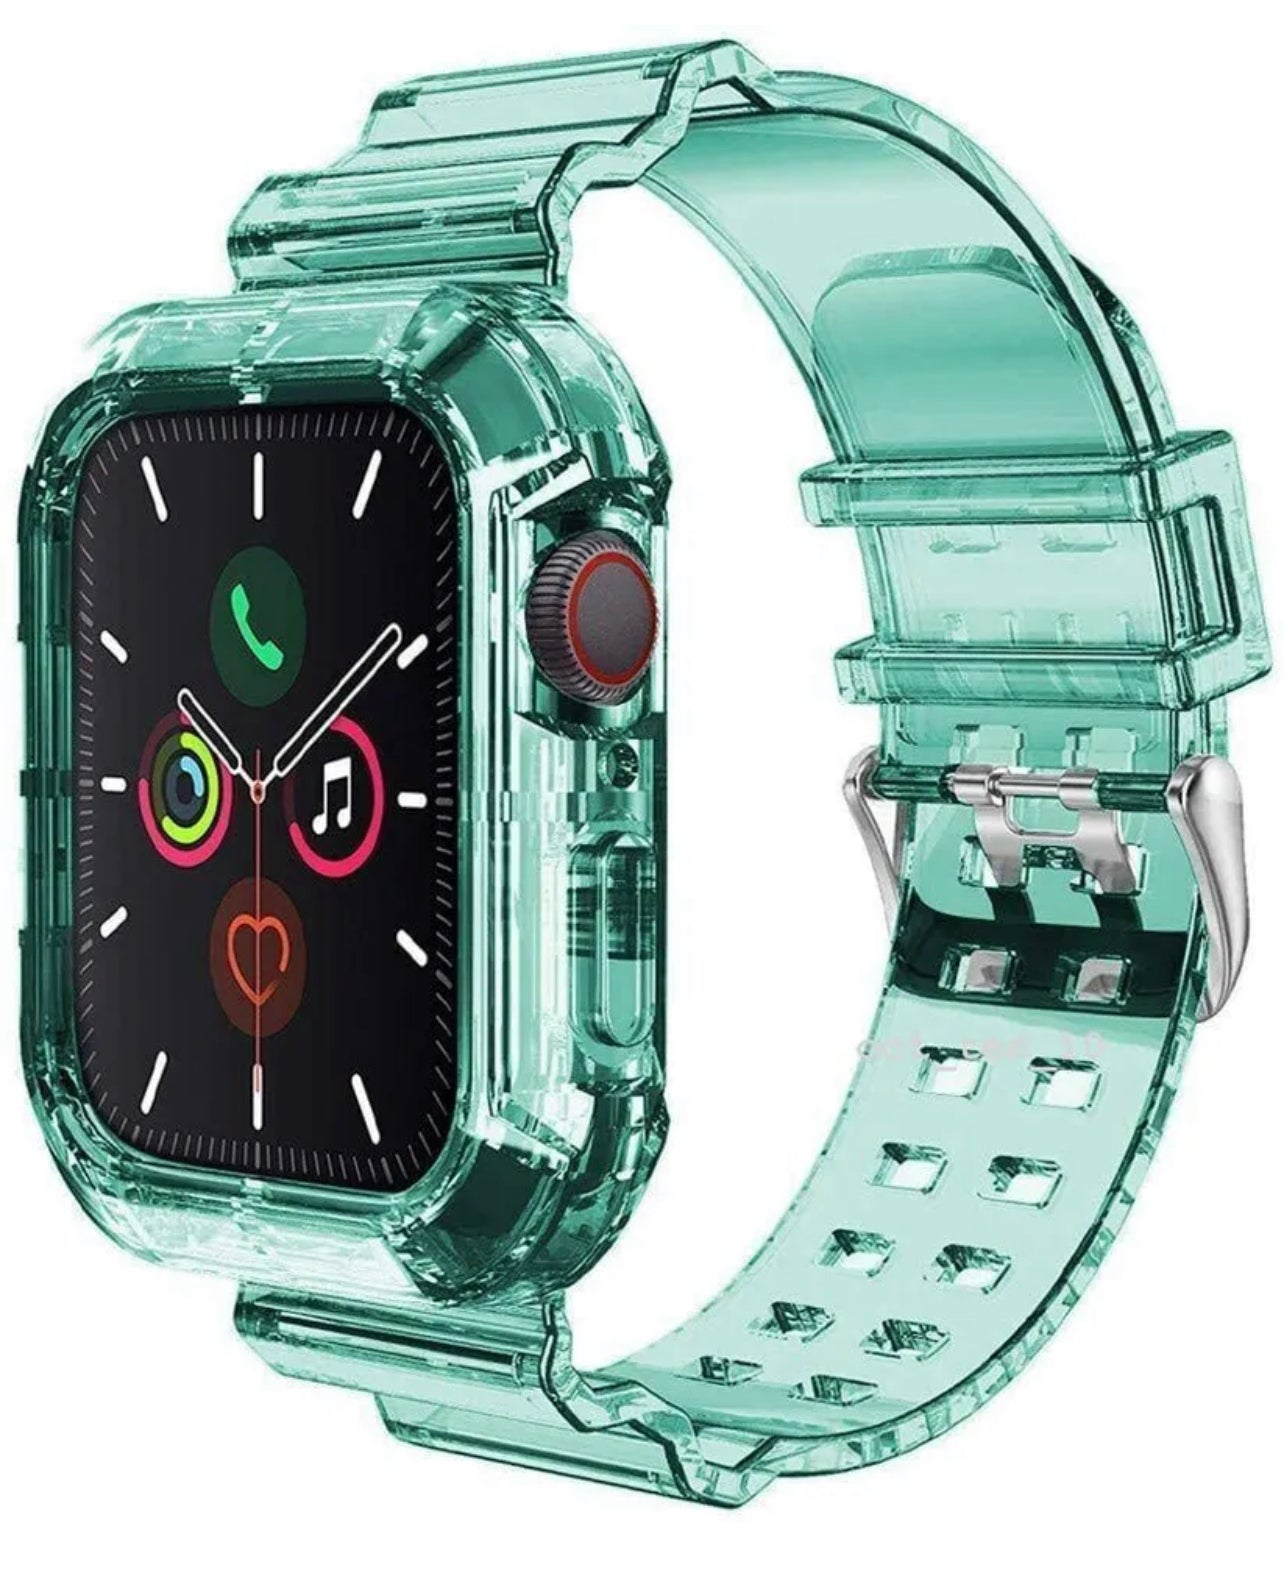 Clear iWatch Band Strap + Case